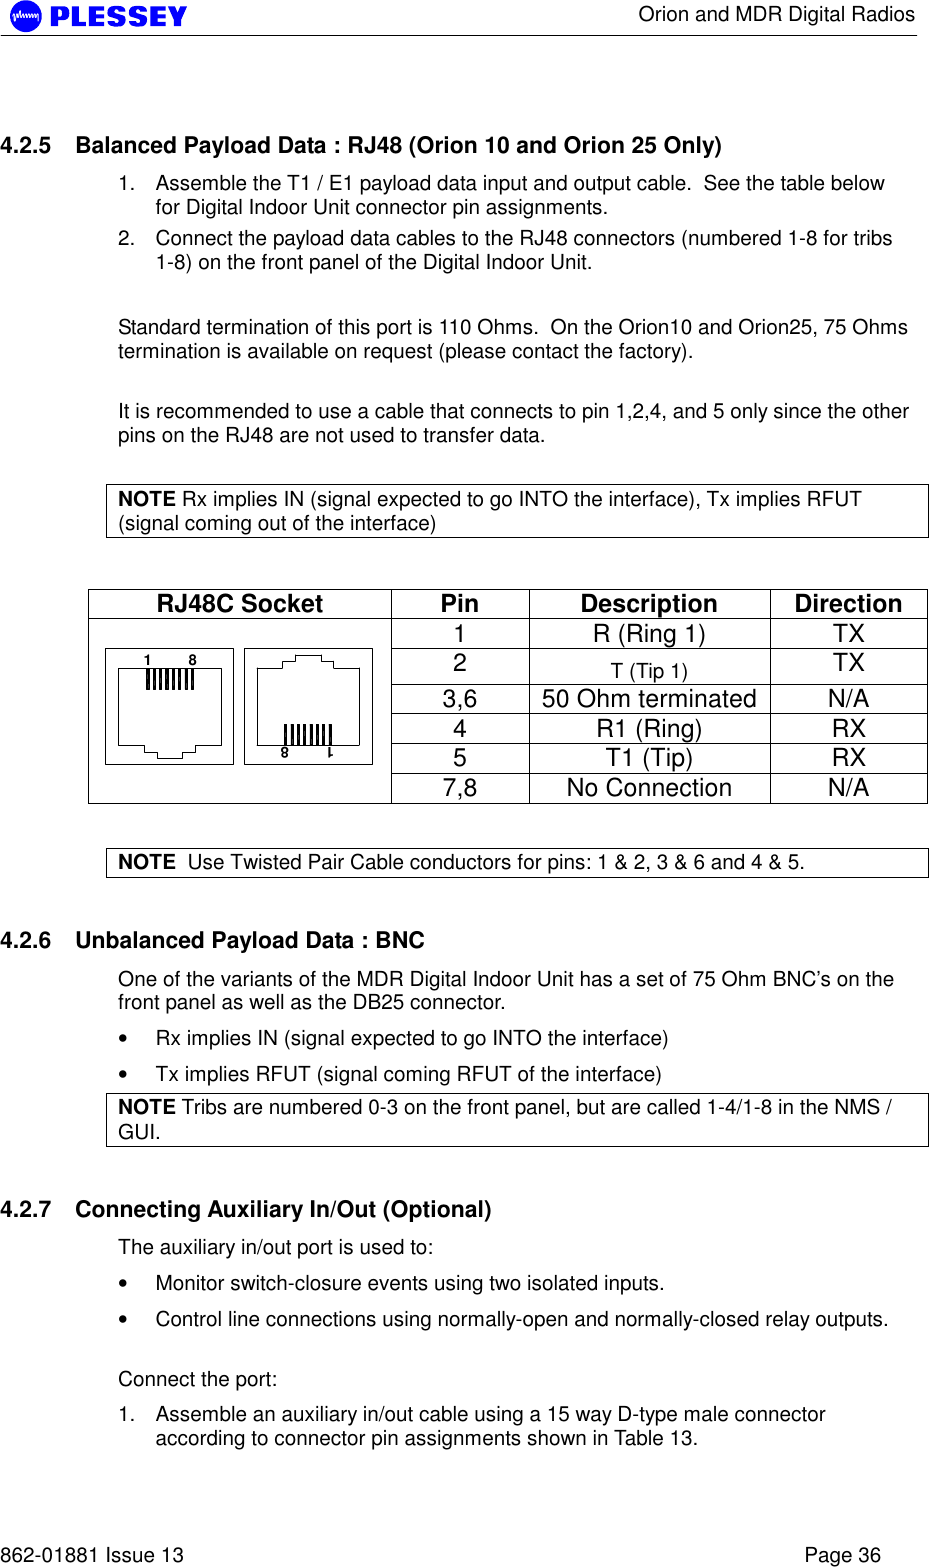      Orion and MDR Digital Radios   862-01881 Issue 13    Page 36 4.2.5  Balanced Payload Data : RJ48 (Orion 10 and Orion 25 Only) 1.  Assemble the T1 / E1 payload data input and output cable.  See the table below for Digital Indoor Unit connector pin assignments. 2.  Connect the payload data cables to the RJ48 connectors (numbered 1-8 for tribs 1-8) on the front panel of the Digital Indoor Unit.  Standard termination of this port is 110 Ohms.  On the Orion10 and Orion25, 75 Ohms termination is available on request (please contact the factory).  It is recommended to use a cable that connects to pin 1,2,4, and 5 only since the other pins on the RJ48 are not used to transfer data.  NOTE Rx implies IN (signal expected to go INTO the interface), Tx implies RFUT (signal coming out of the interface)  RJ48C Socket  Pin  Description  Direction 1  R (Ring 1)  TX 2  T (Tip 1)  TX 3,6  50 Ohm terminated  N/A 4 R1 (Ring) RX 5 T1 (Tip) RX  1         81         87,8  No Connection   N/A  NOTE  Use Twisted Pair Cable conductors for pins: 1 &amp; 2, 3 &amp; 6 and 4 &amp; 5. 4.2.6  Unbalanced Payload Data : BNC One of the variants of the MDR Digital Indoor Unit has a set of 75 Ohm BNC’s on the front panel as well as the DB25 connector.   • Rx implies IN (signal expected to go INTO the interface) • Tx implies RFUT (signal coming RFUT of the interface) NOTE Tribs are numbered 0-3 on the front panel, but are called 1-4/1-8 in the NMS / GUI.  4.2.7  Connecting Auxiliary In/Out (Optional) The auxiliary in/out port is used to: • Monitor switch-closure events using two isolated inputs. • Control line connections using normally-open and normally-closed relay outputs.  Connect the port: 1.  Assemble an auxiliary in/out cable using a 15 way D-type male connector according to connector pin assignments shown in Table 13. 